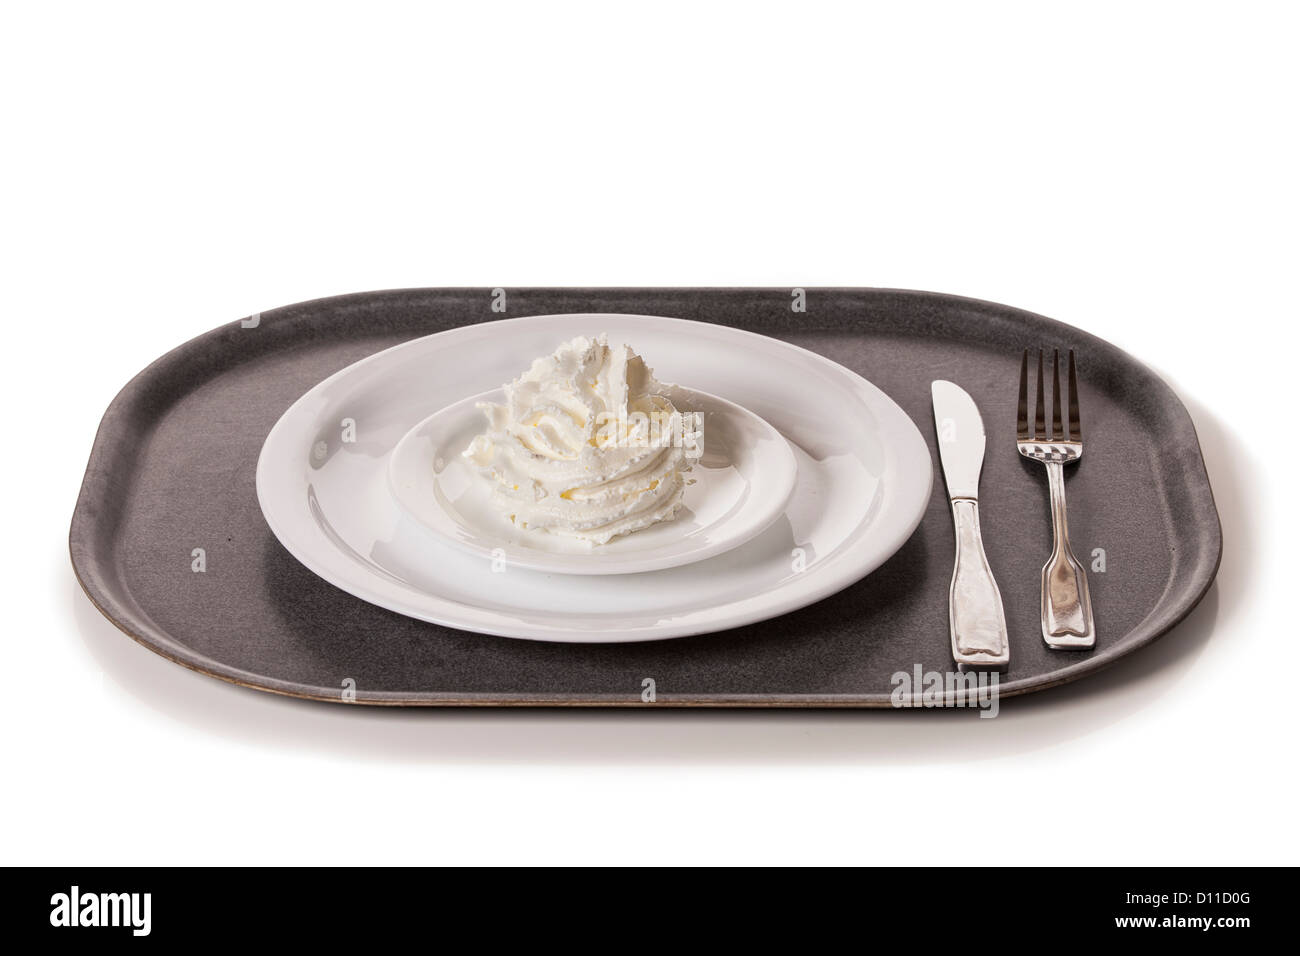 Whipped cream on a plate, ready to eat an unhealthy dinner. Stock Photo